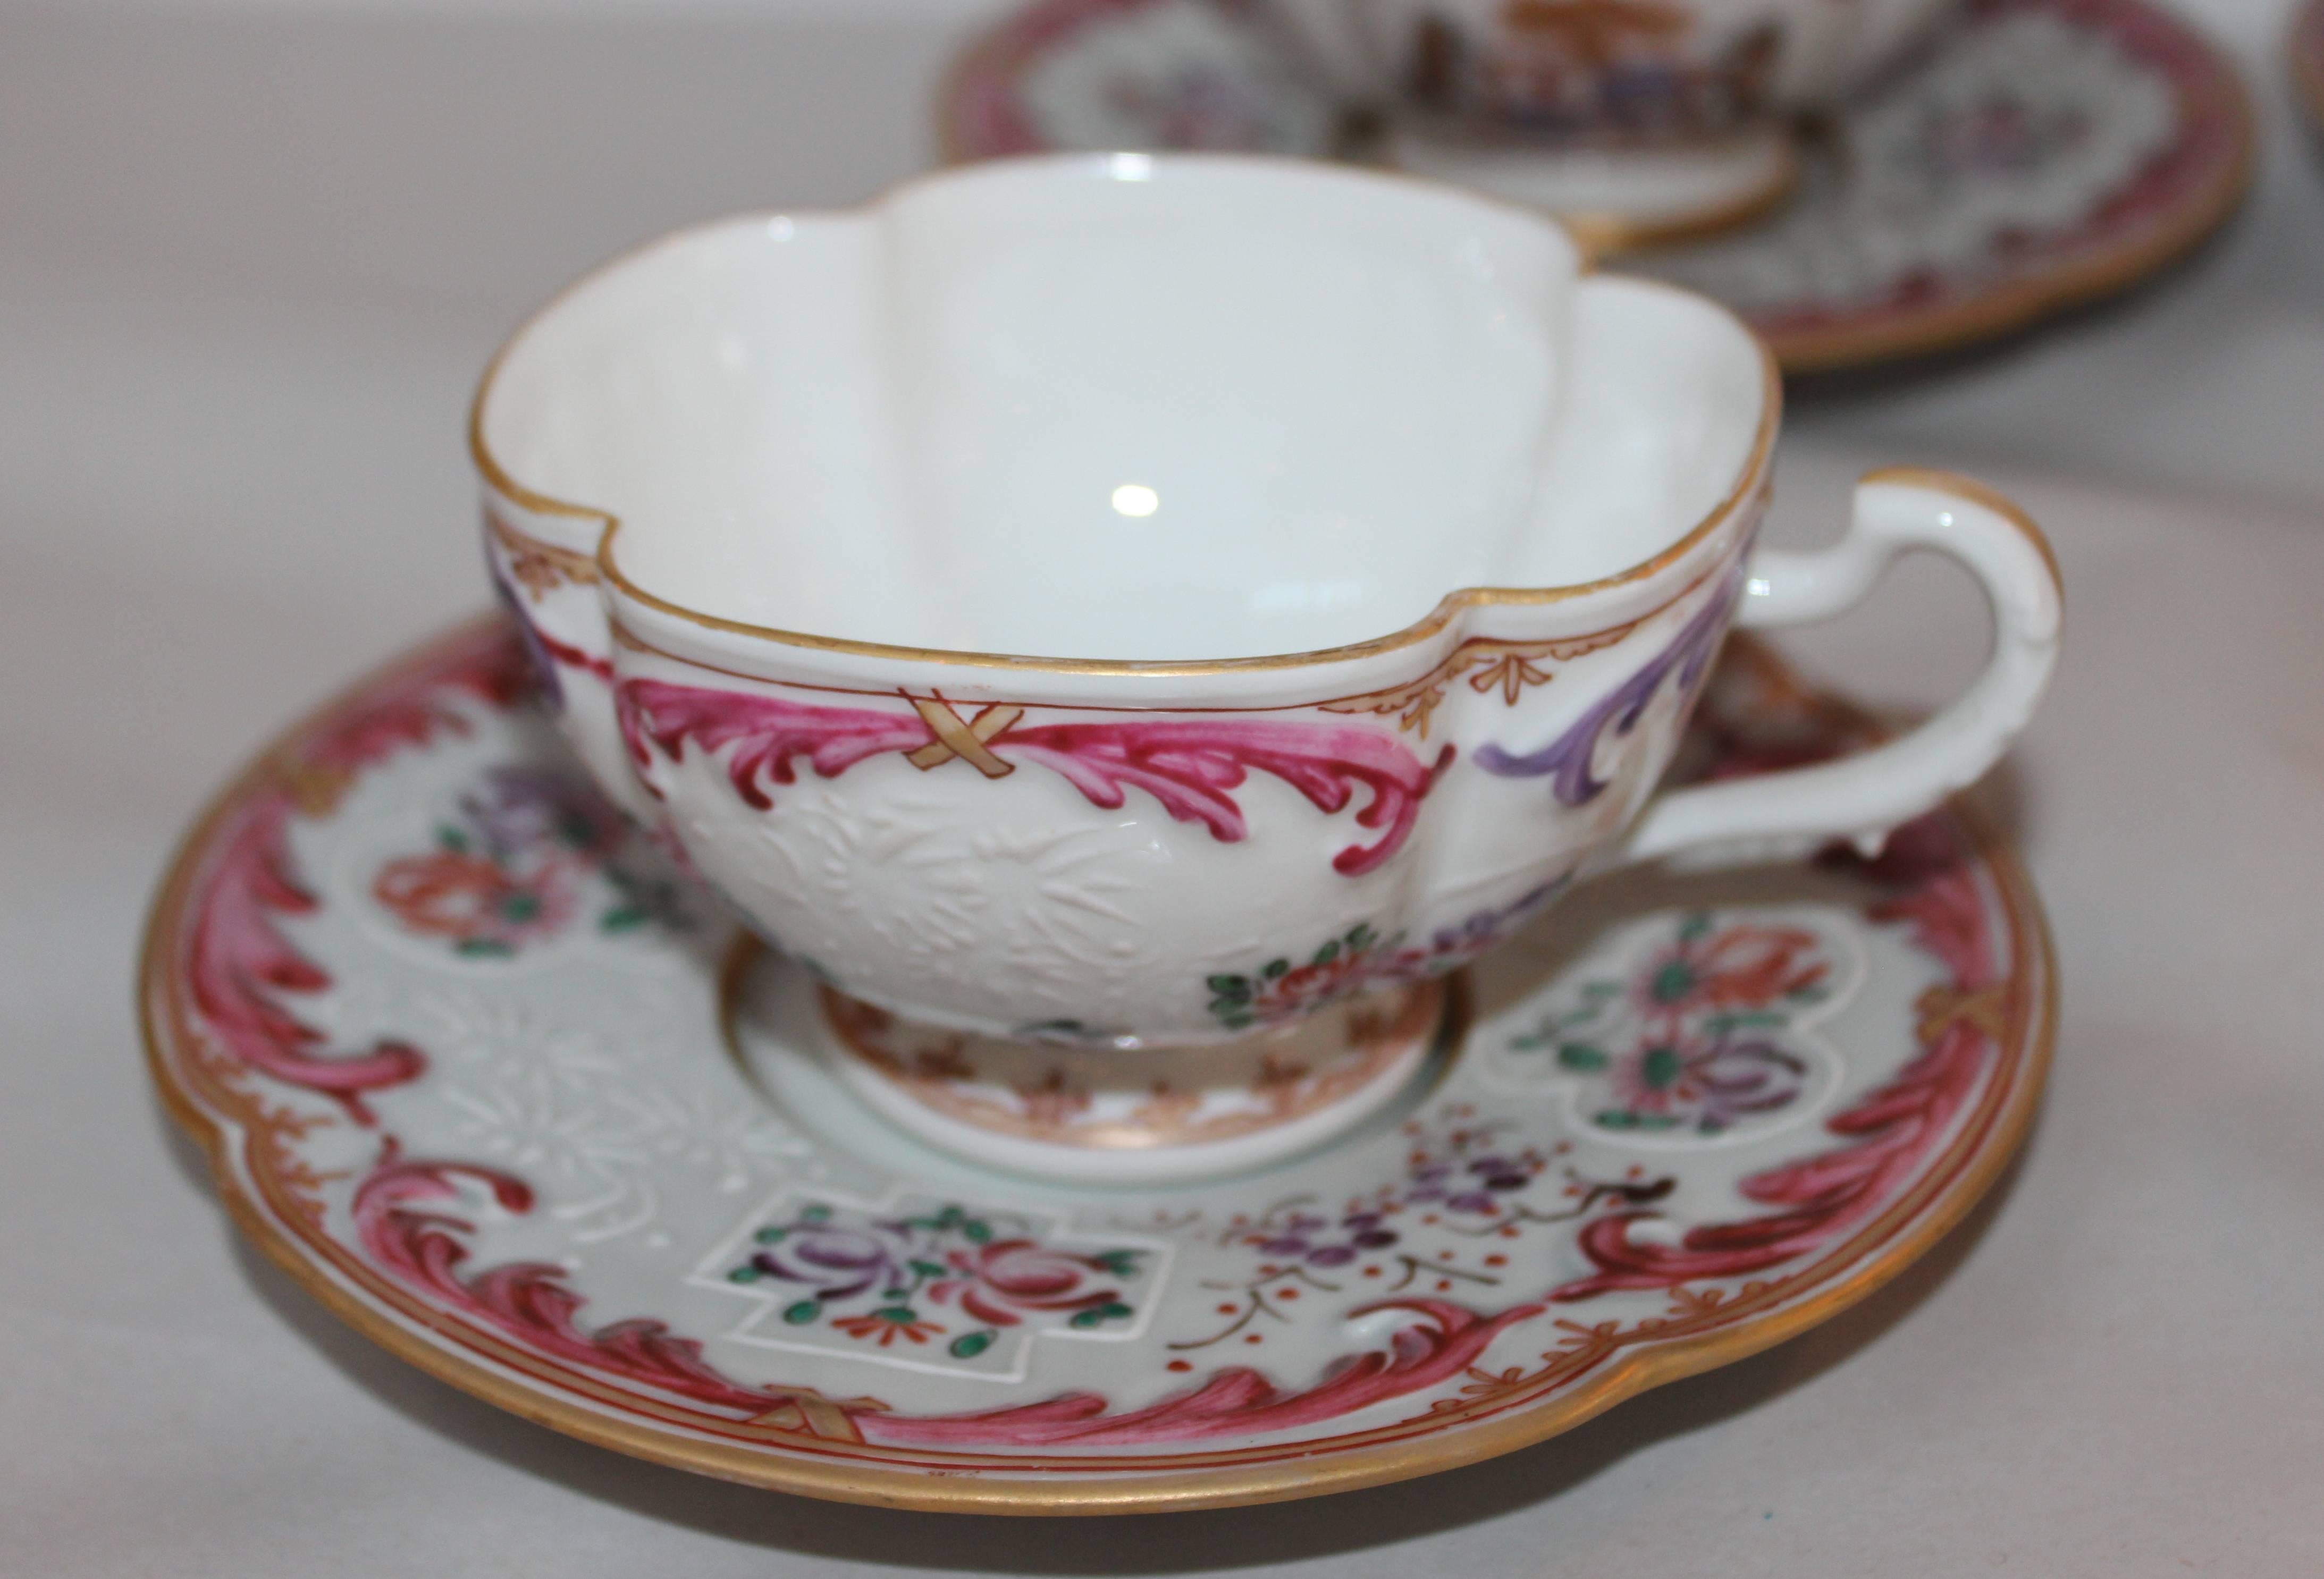 French Set of Eight Samson France Porcelain Cups and Saucers, Chinese Export Style